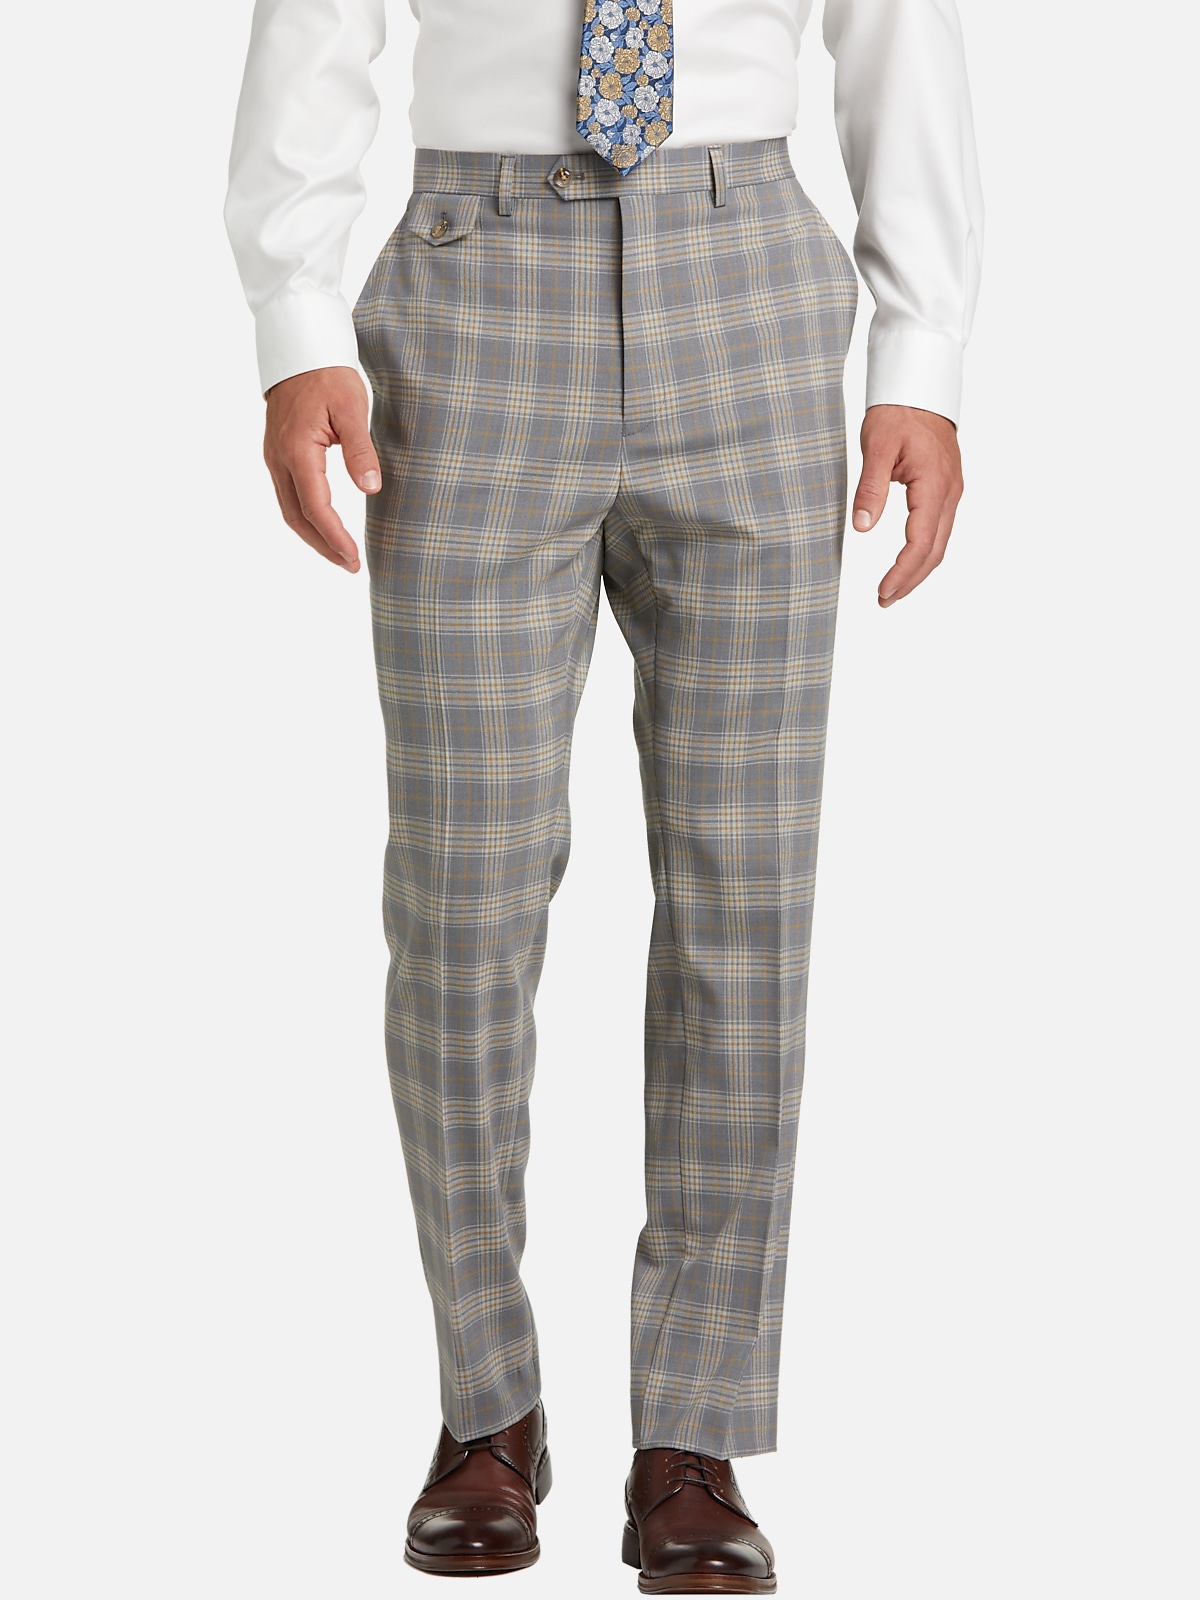 Tayion Classic Fit Suit Separates Pants | All Clearance $39.99| Men's ...